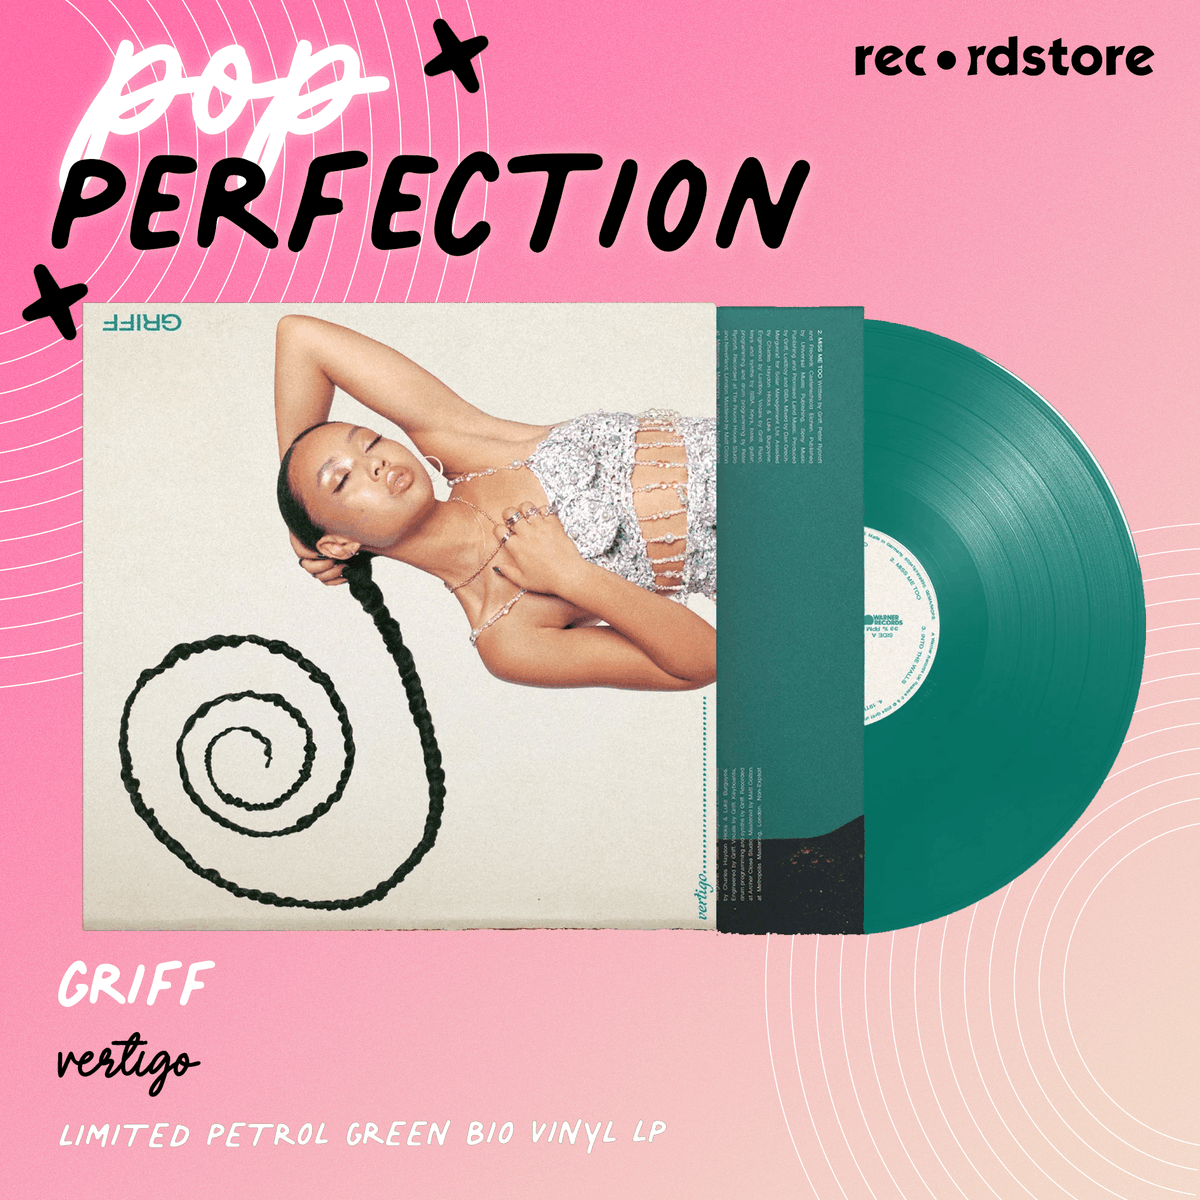 POP PERFECTION COLLECTION 💗

Looking for that perfect Pop fix? Our Pop collection has got you covered with the latest new arrivals, signed exclusives and limited vinyl editions from Gracie Abrams, Camila Cabello, AURORA, Griff and more!

Explore now >> lnk.to/Vm6rsaTP